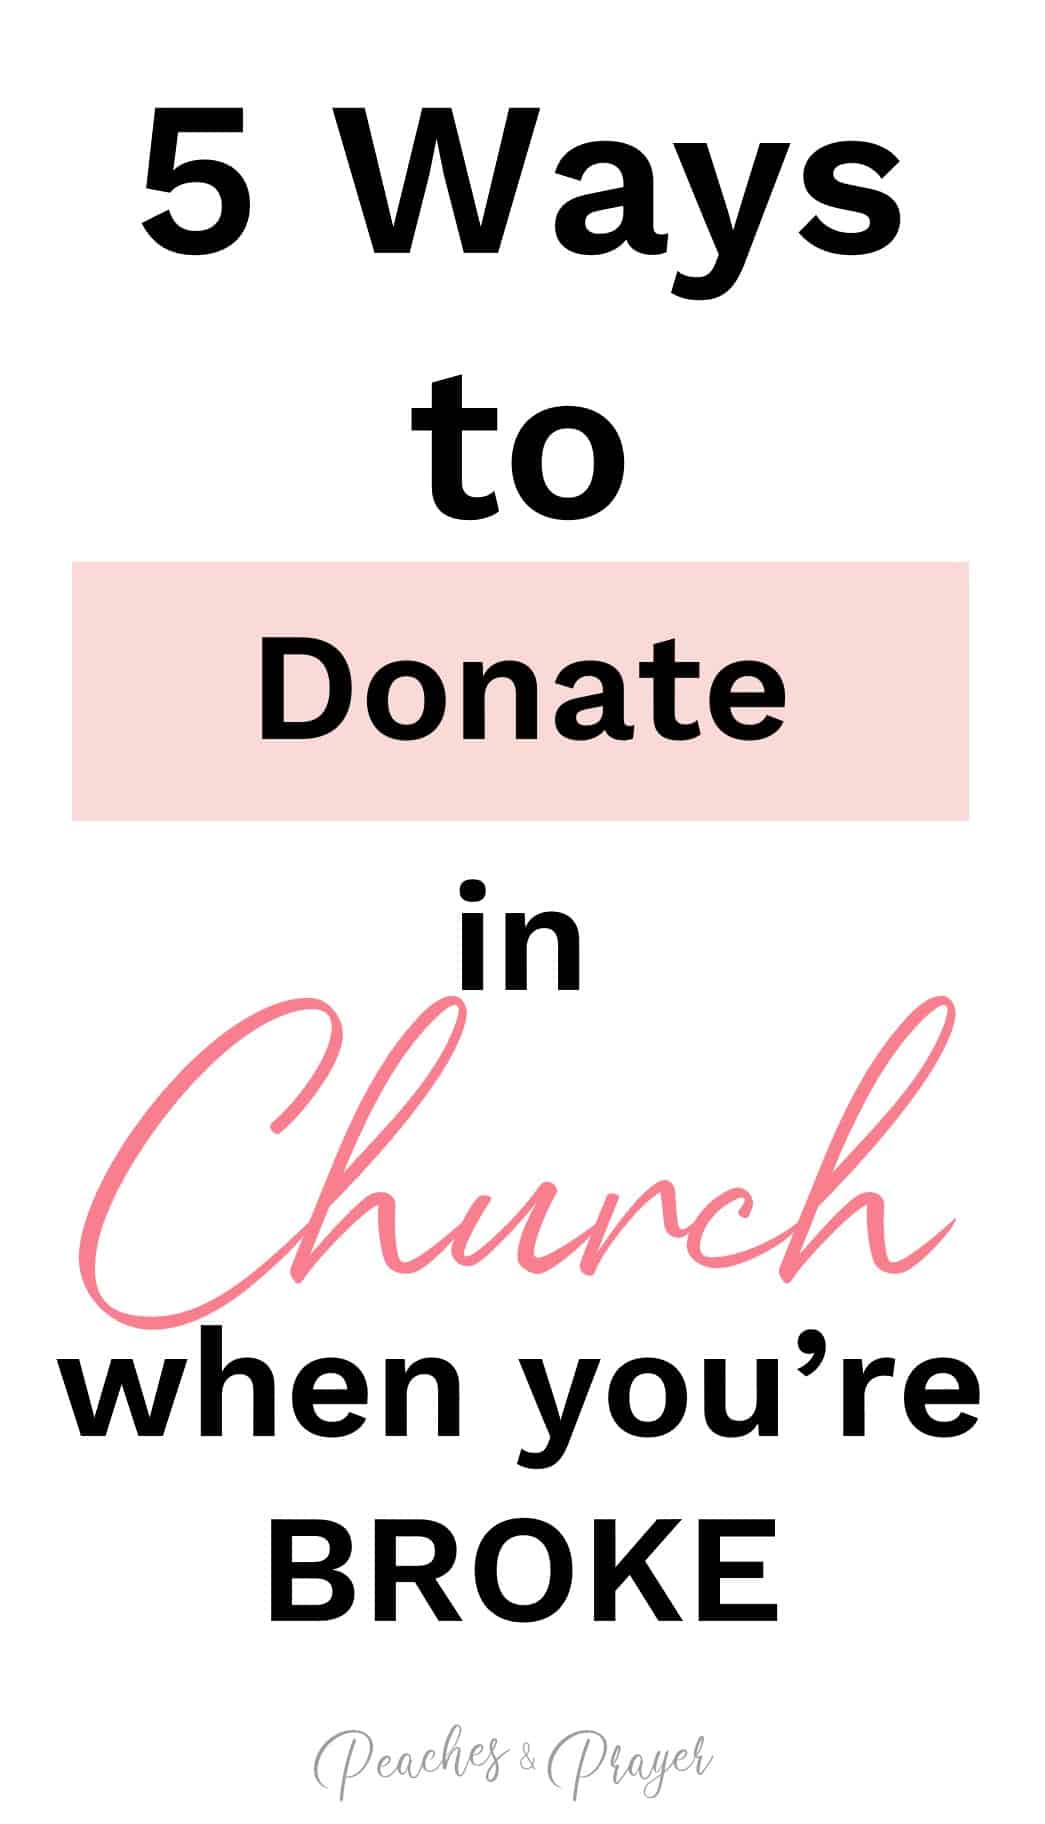 5 Ways to Donate in the Church When You’re Broke